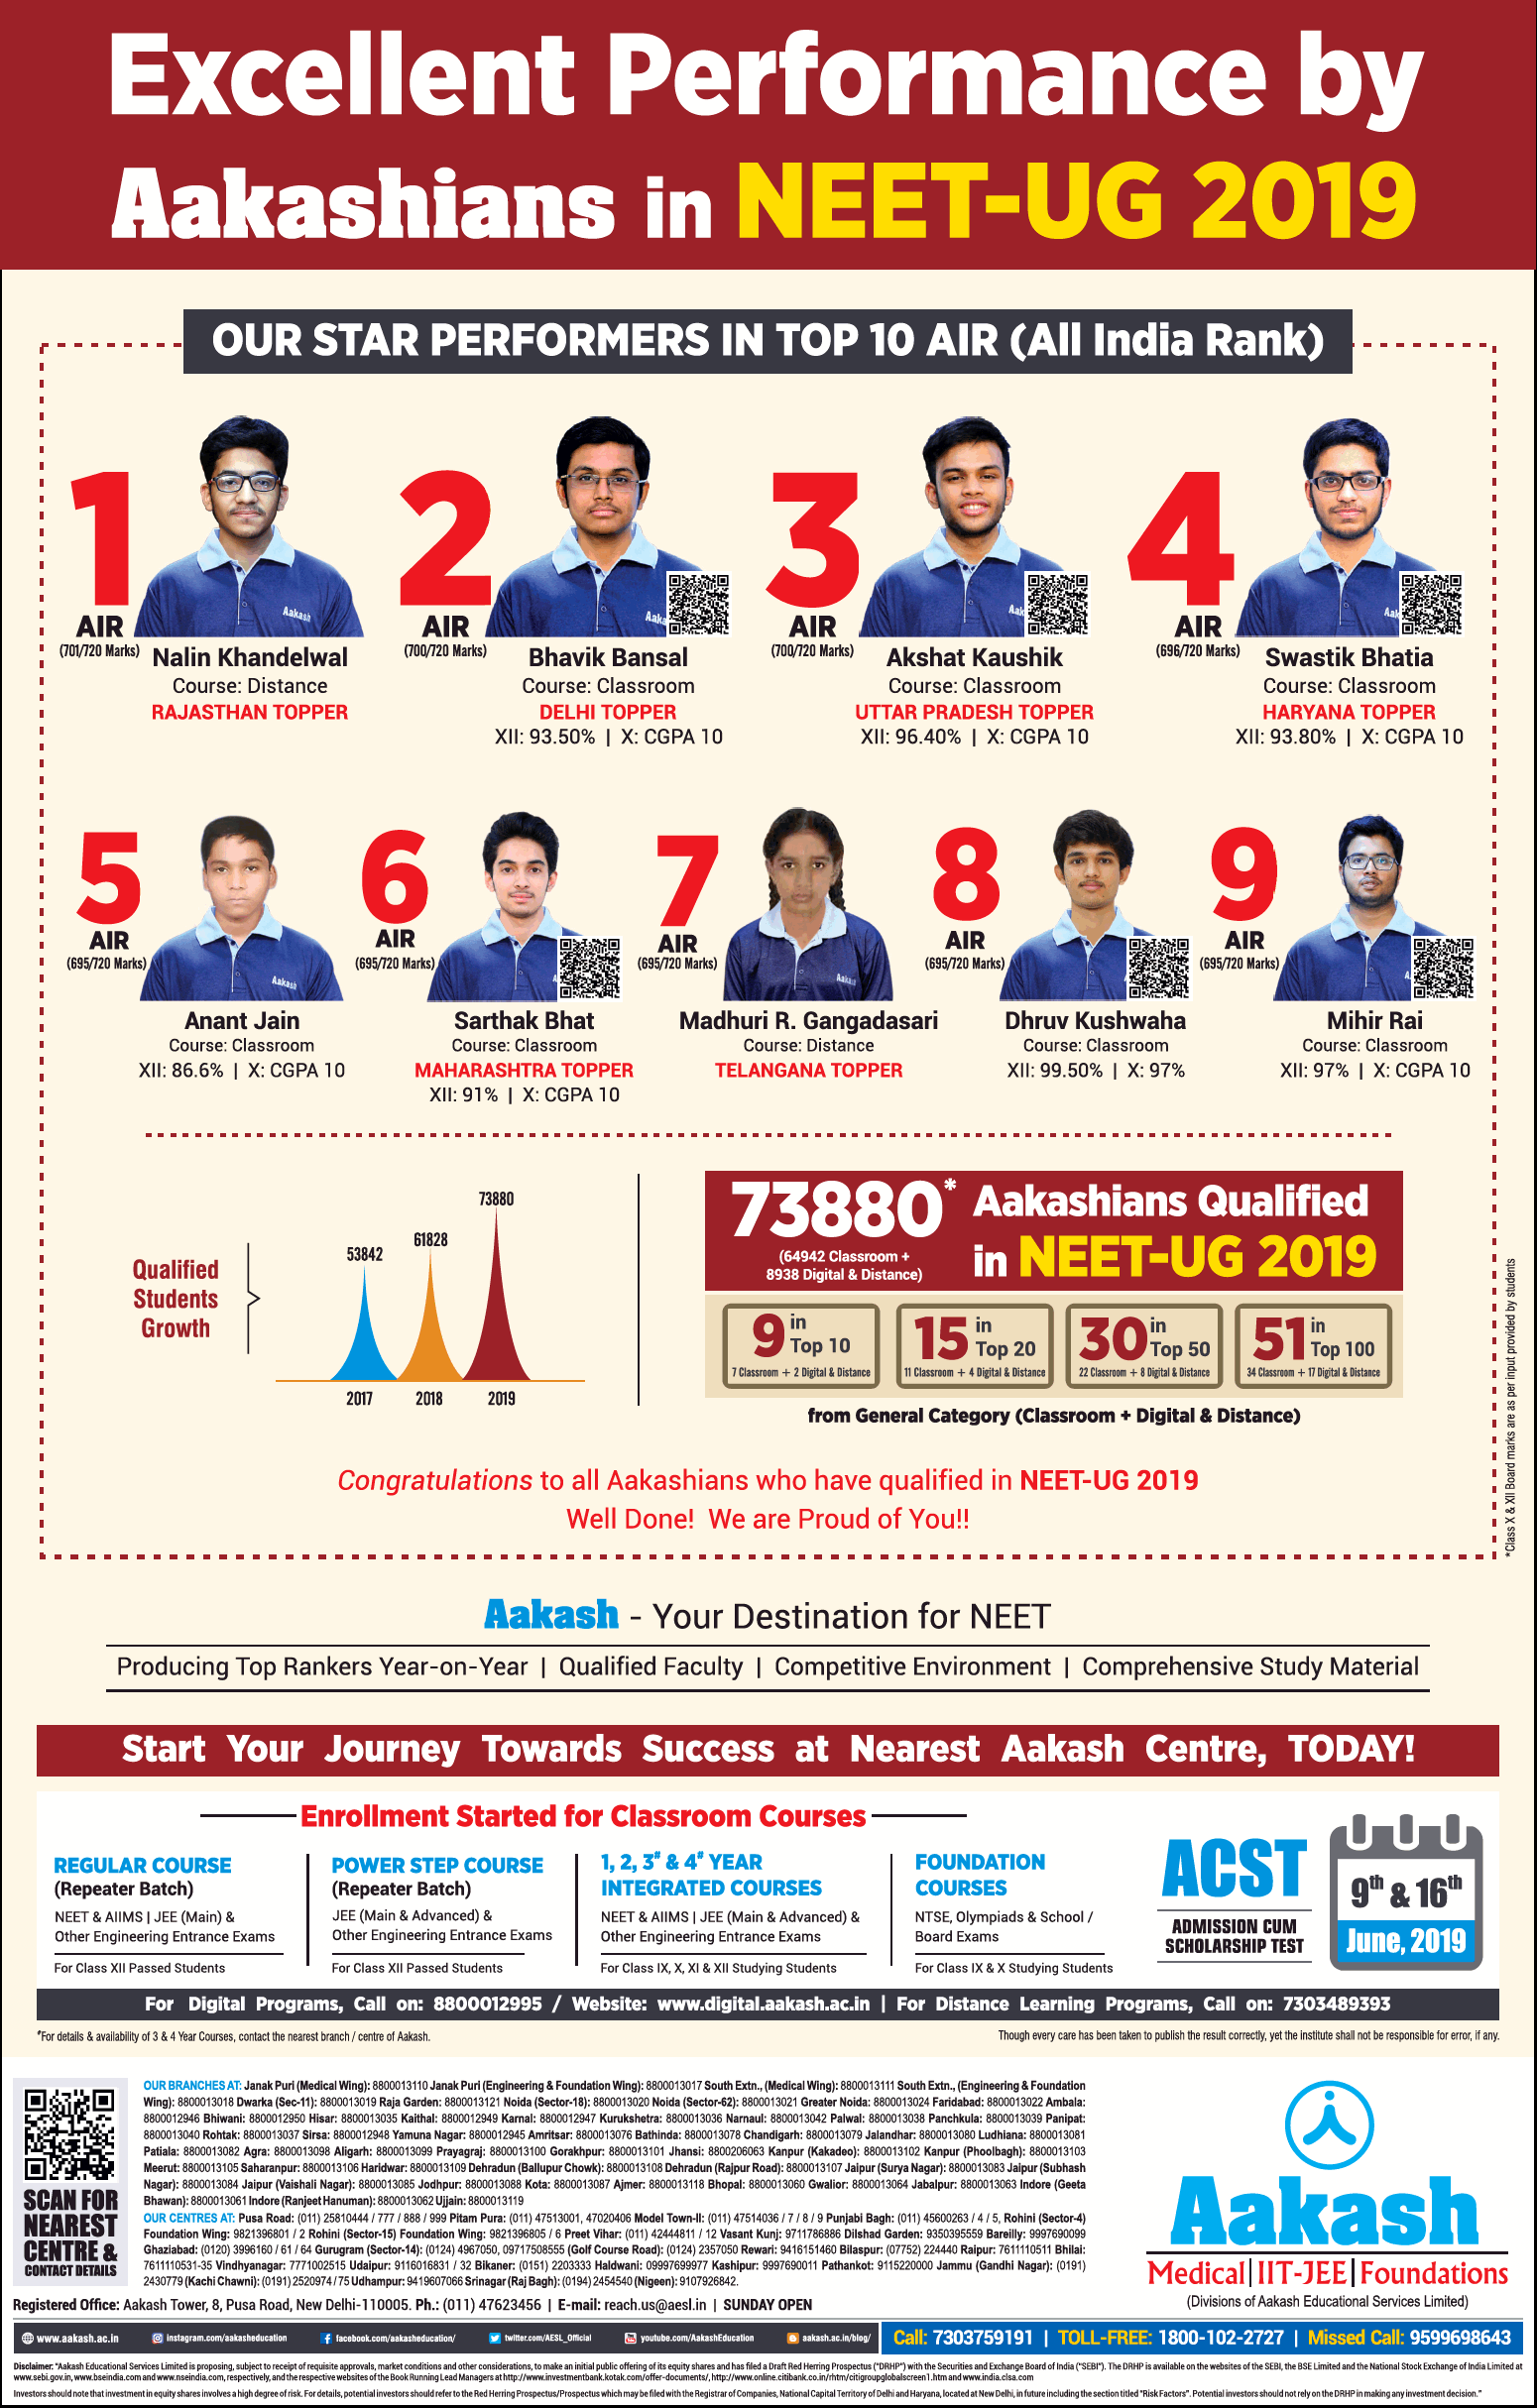 aakash-iit-foundation-excellent-performance-by-aakashians-in-neet-ug-2019-ad-times-of-india-delhi-07-06-2019.png